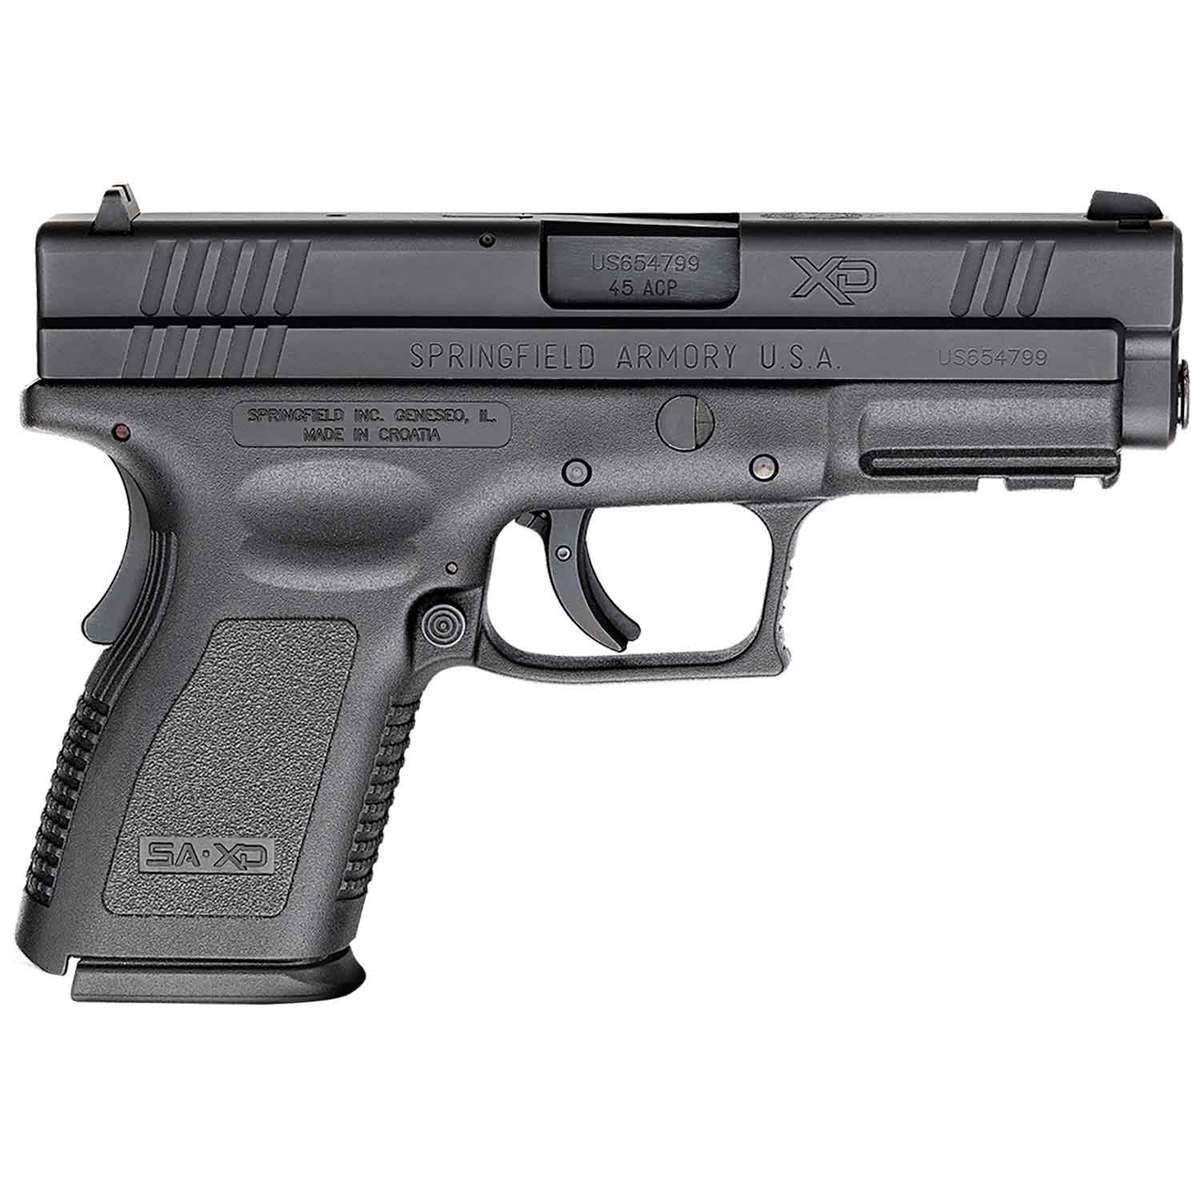 springfield-armory-xd-compact-45-auto-acp-4in-blued-pistol-10-1-rounds-california